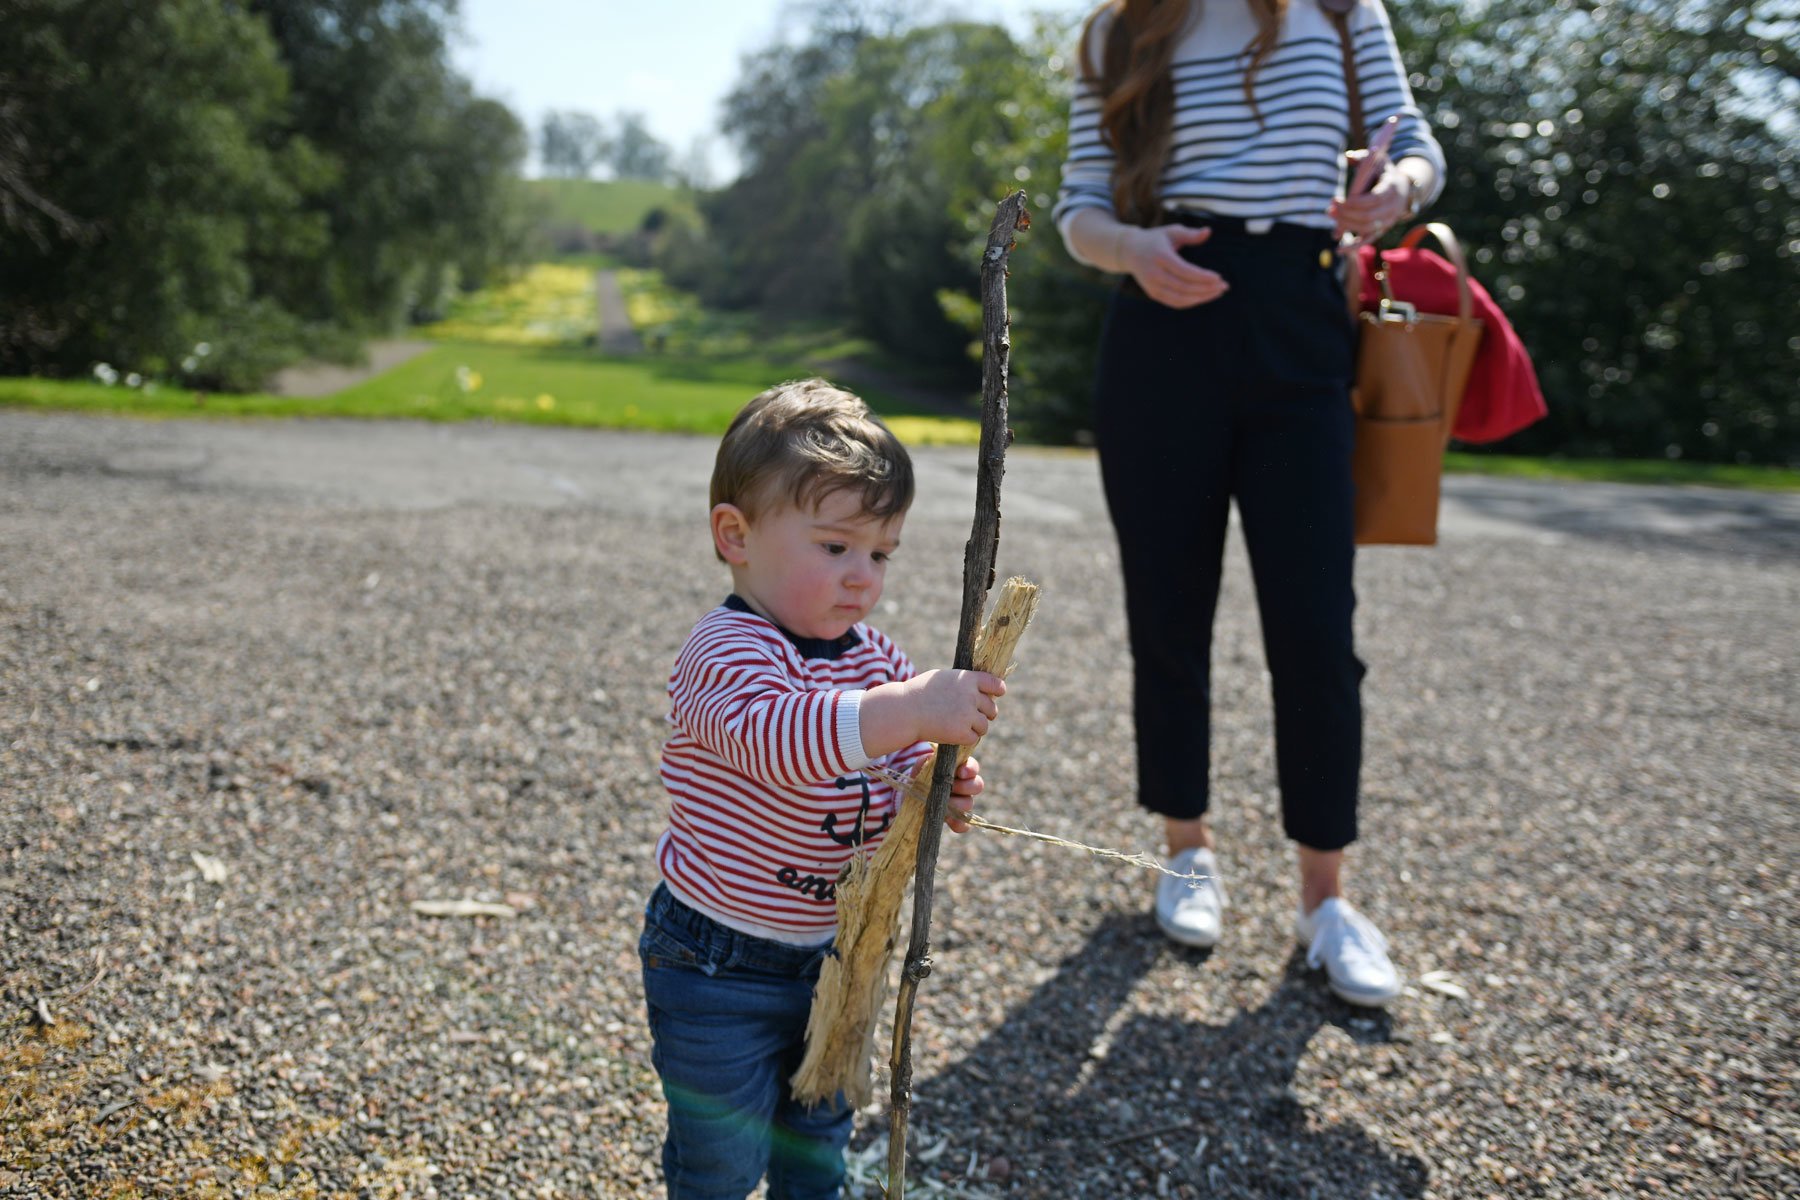 Why do toddlers love sticks so much?